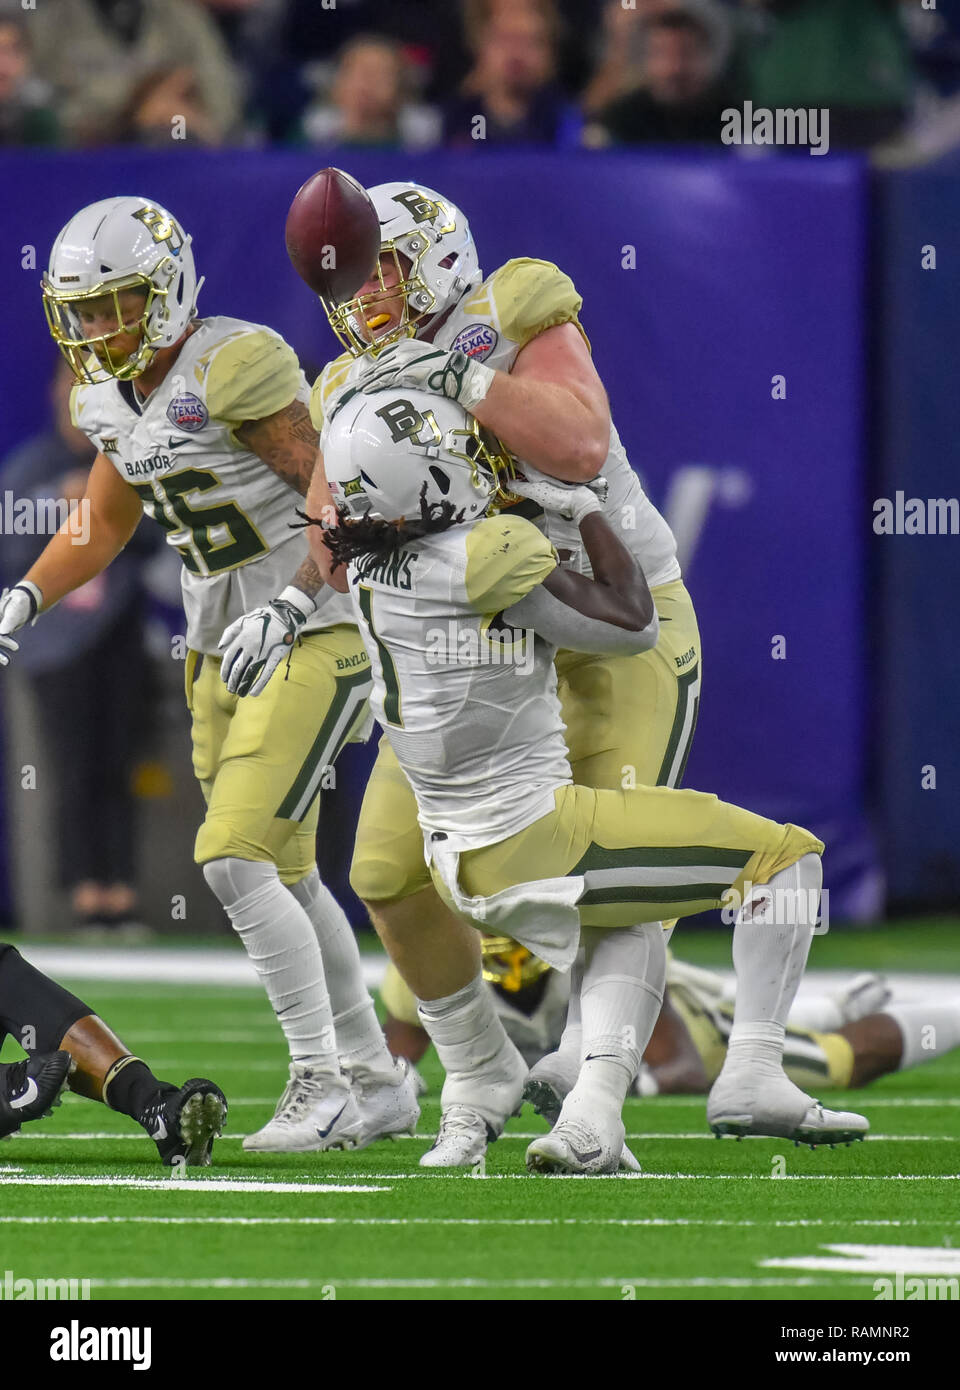 December 27, 2018 Houston, TX...Baylor Bear lineman, James Lynch (93) , in action at the NCAA football Academy Sports and Outdoors Texas Bowl game between the Baylor Bears and the Vanderbilt Commodores at NRG Stadium in Houston, TX. (Absolute Complete Photographer & Company Credit: Joe Calomeni / MarinMedia.org / Cal Sport Media) Stock Photo